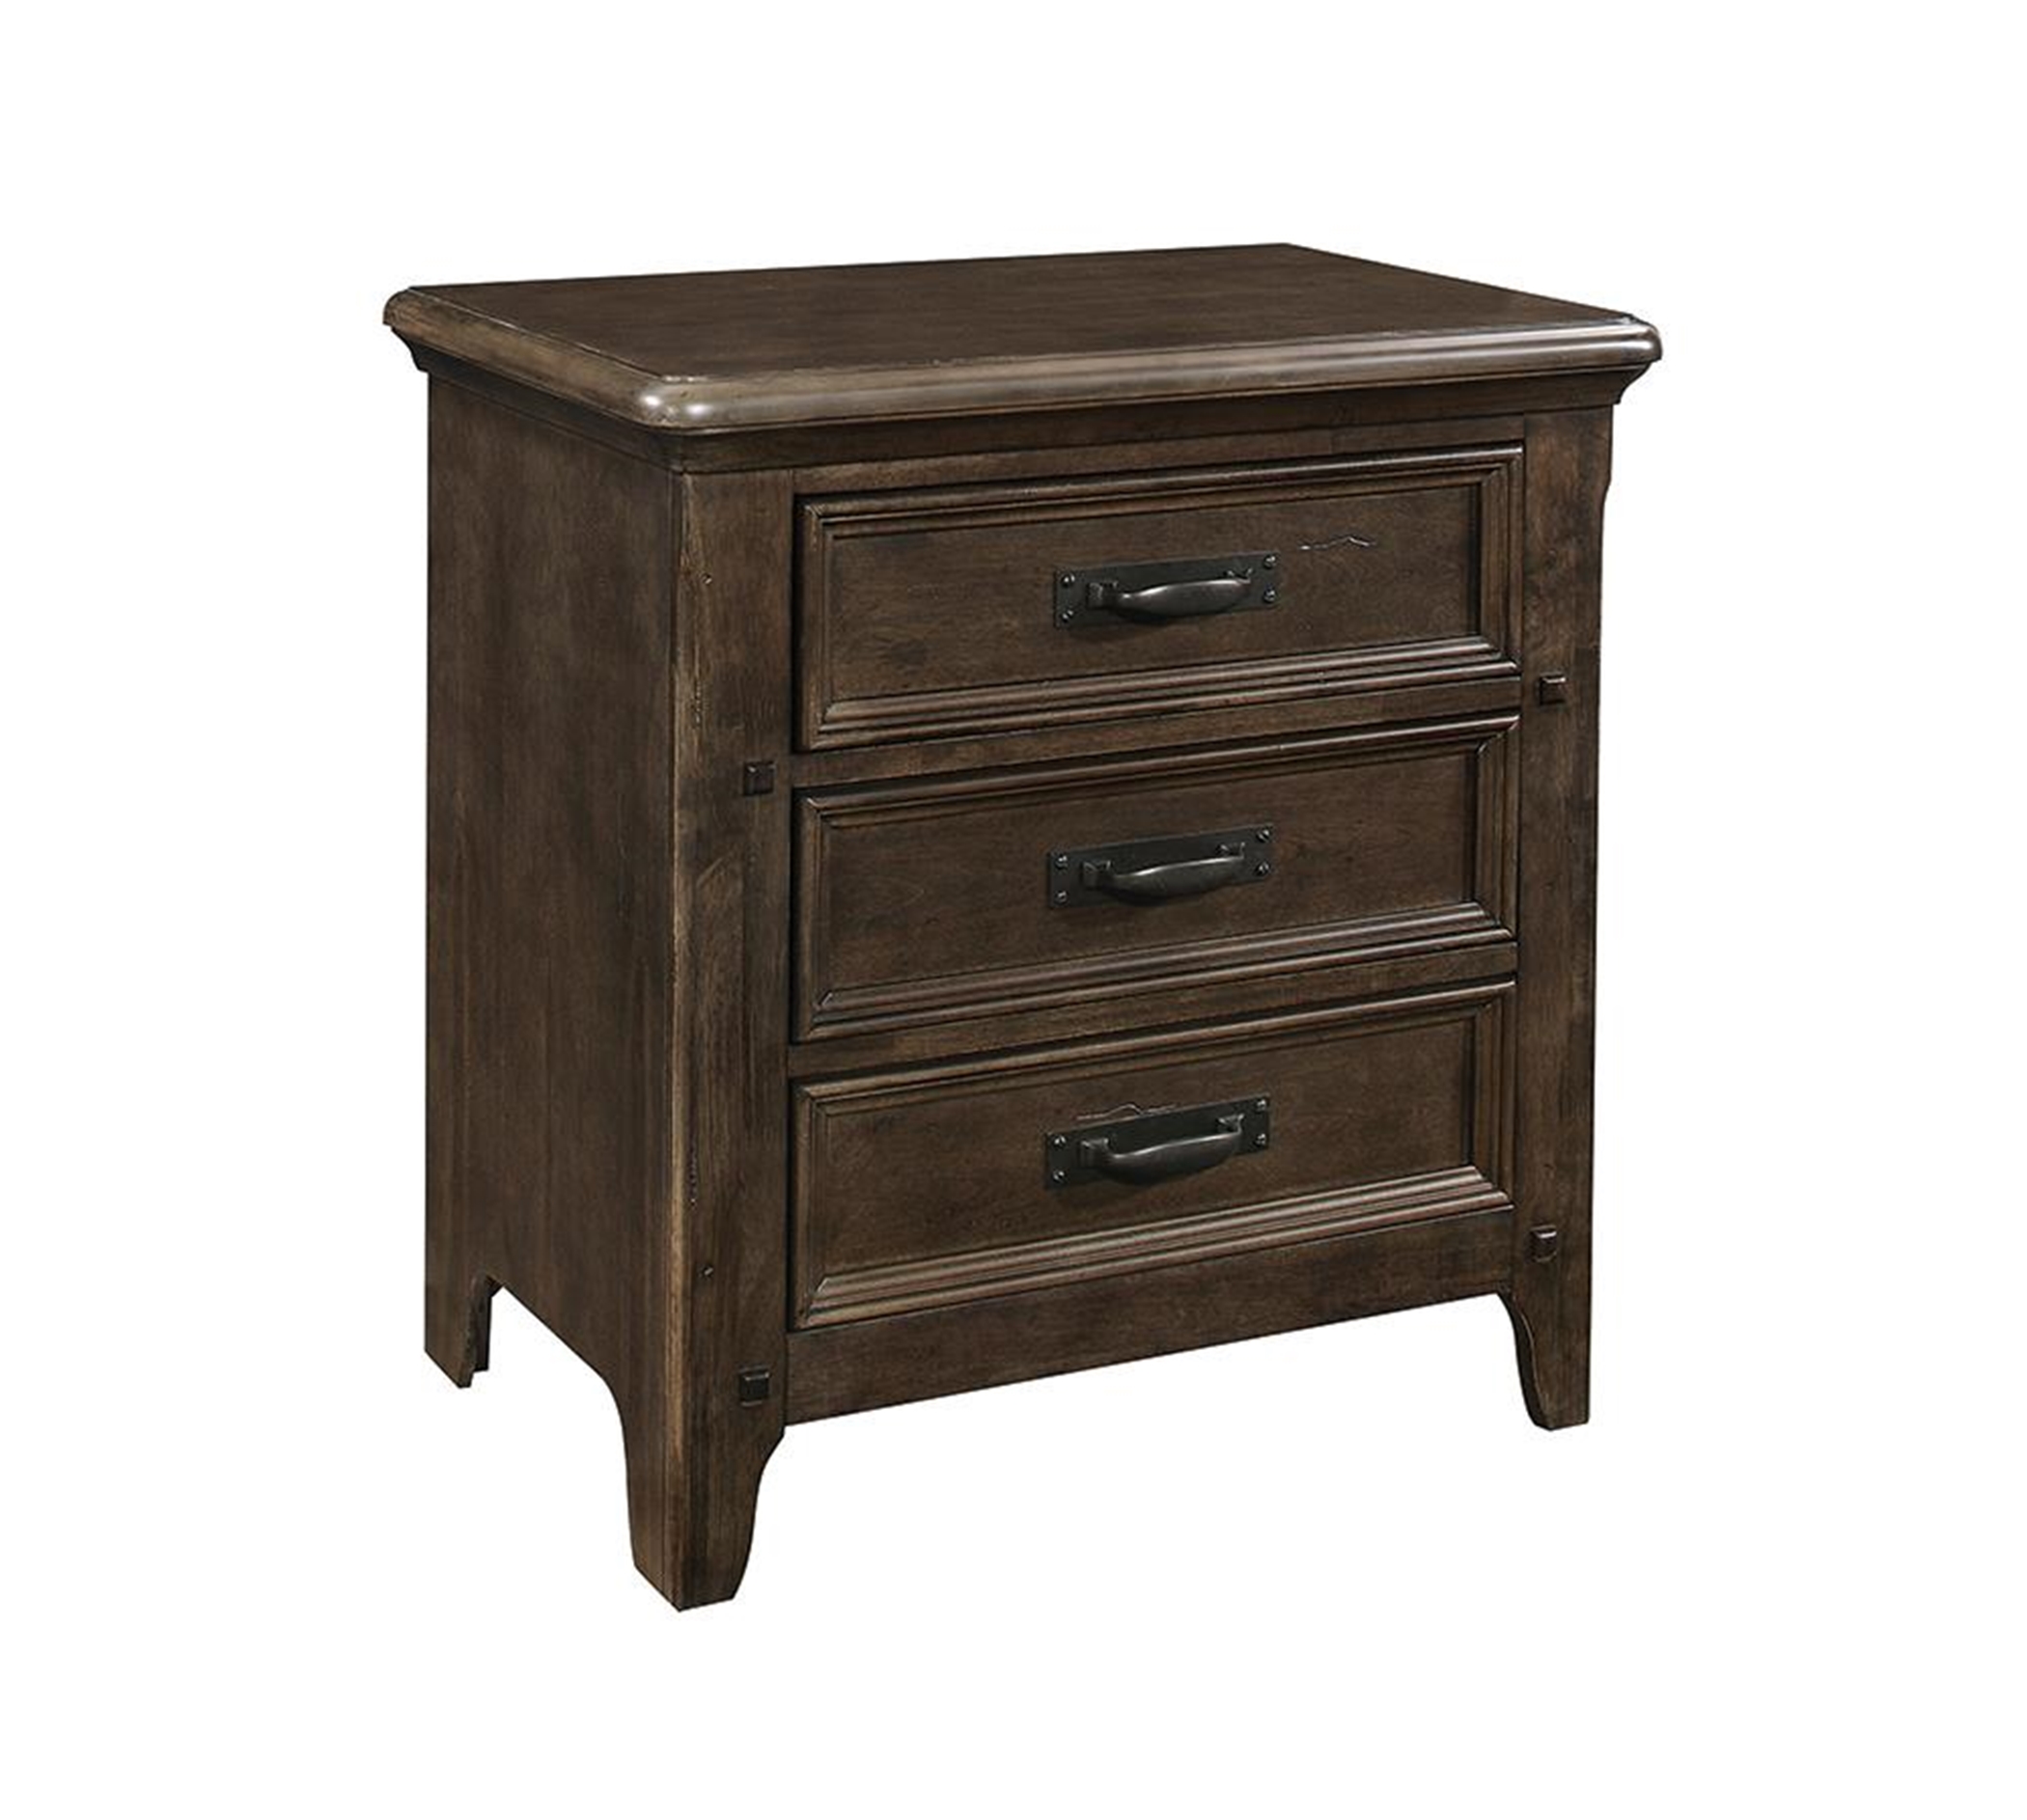 Ives Traditional Antique Mink Nightstand